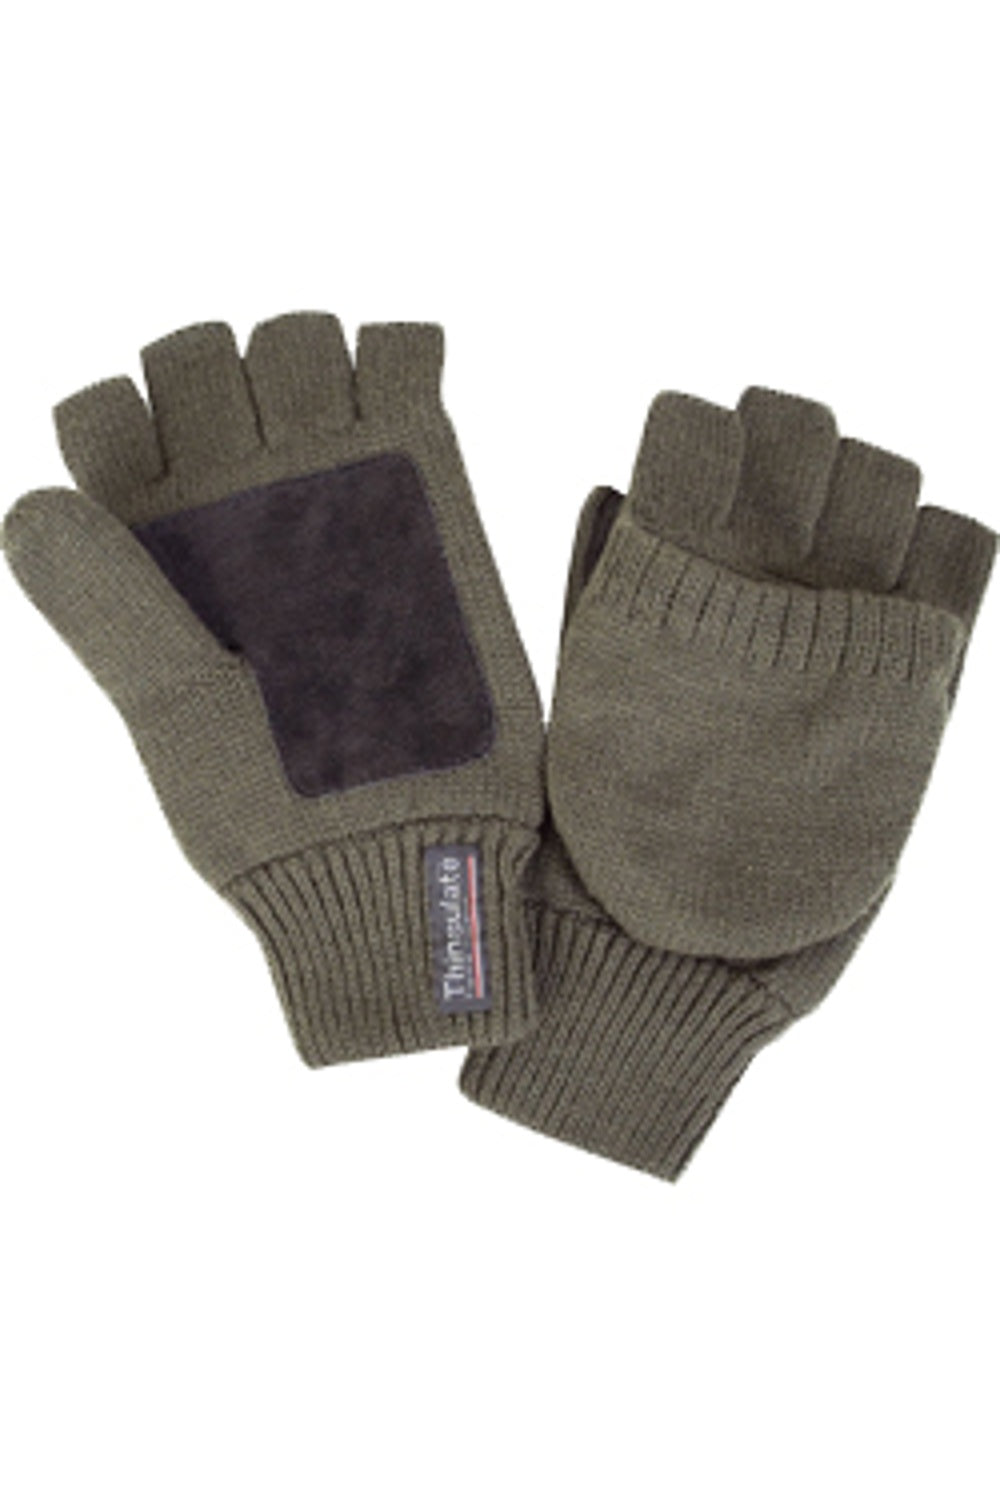 Bisley Thinsulate Shooters Mitts 